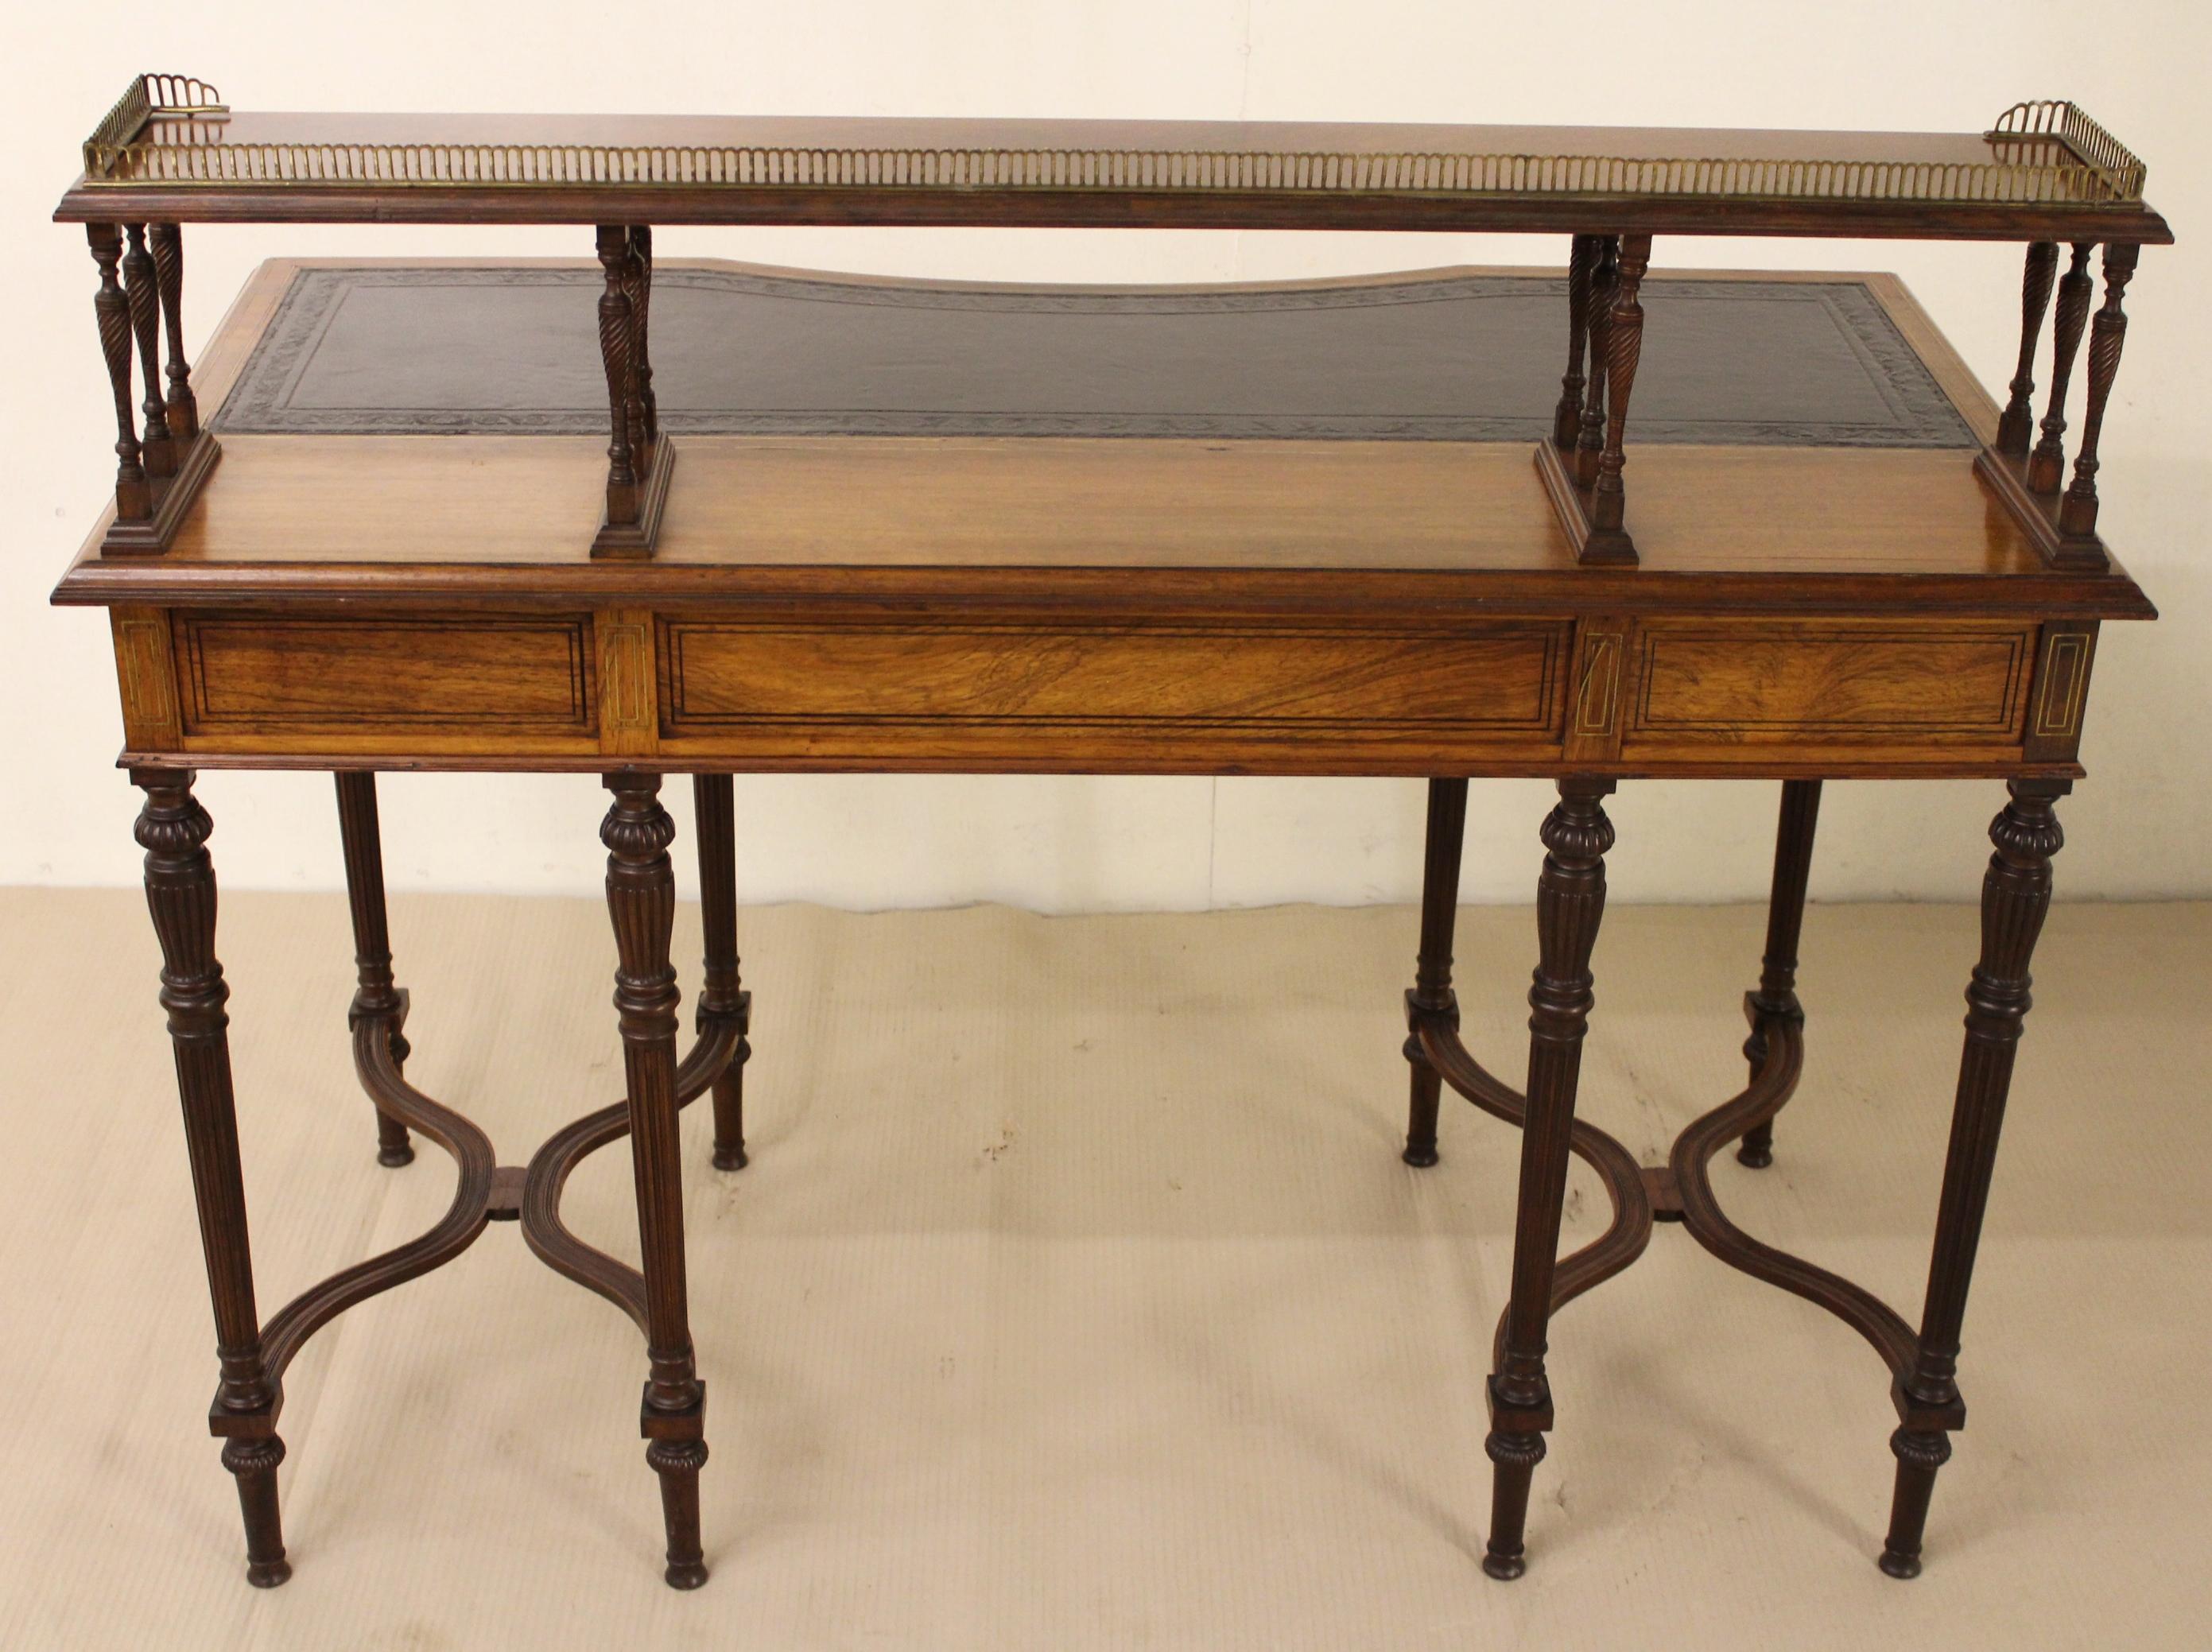 A very fine quality writing table by the prestigious London firm of cabinet makers, Collinson and Lock. Made in the third quarter of the 19th century with Regency style influences. Of excellent construction in rosewood and attractive rosewood